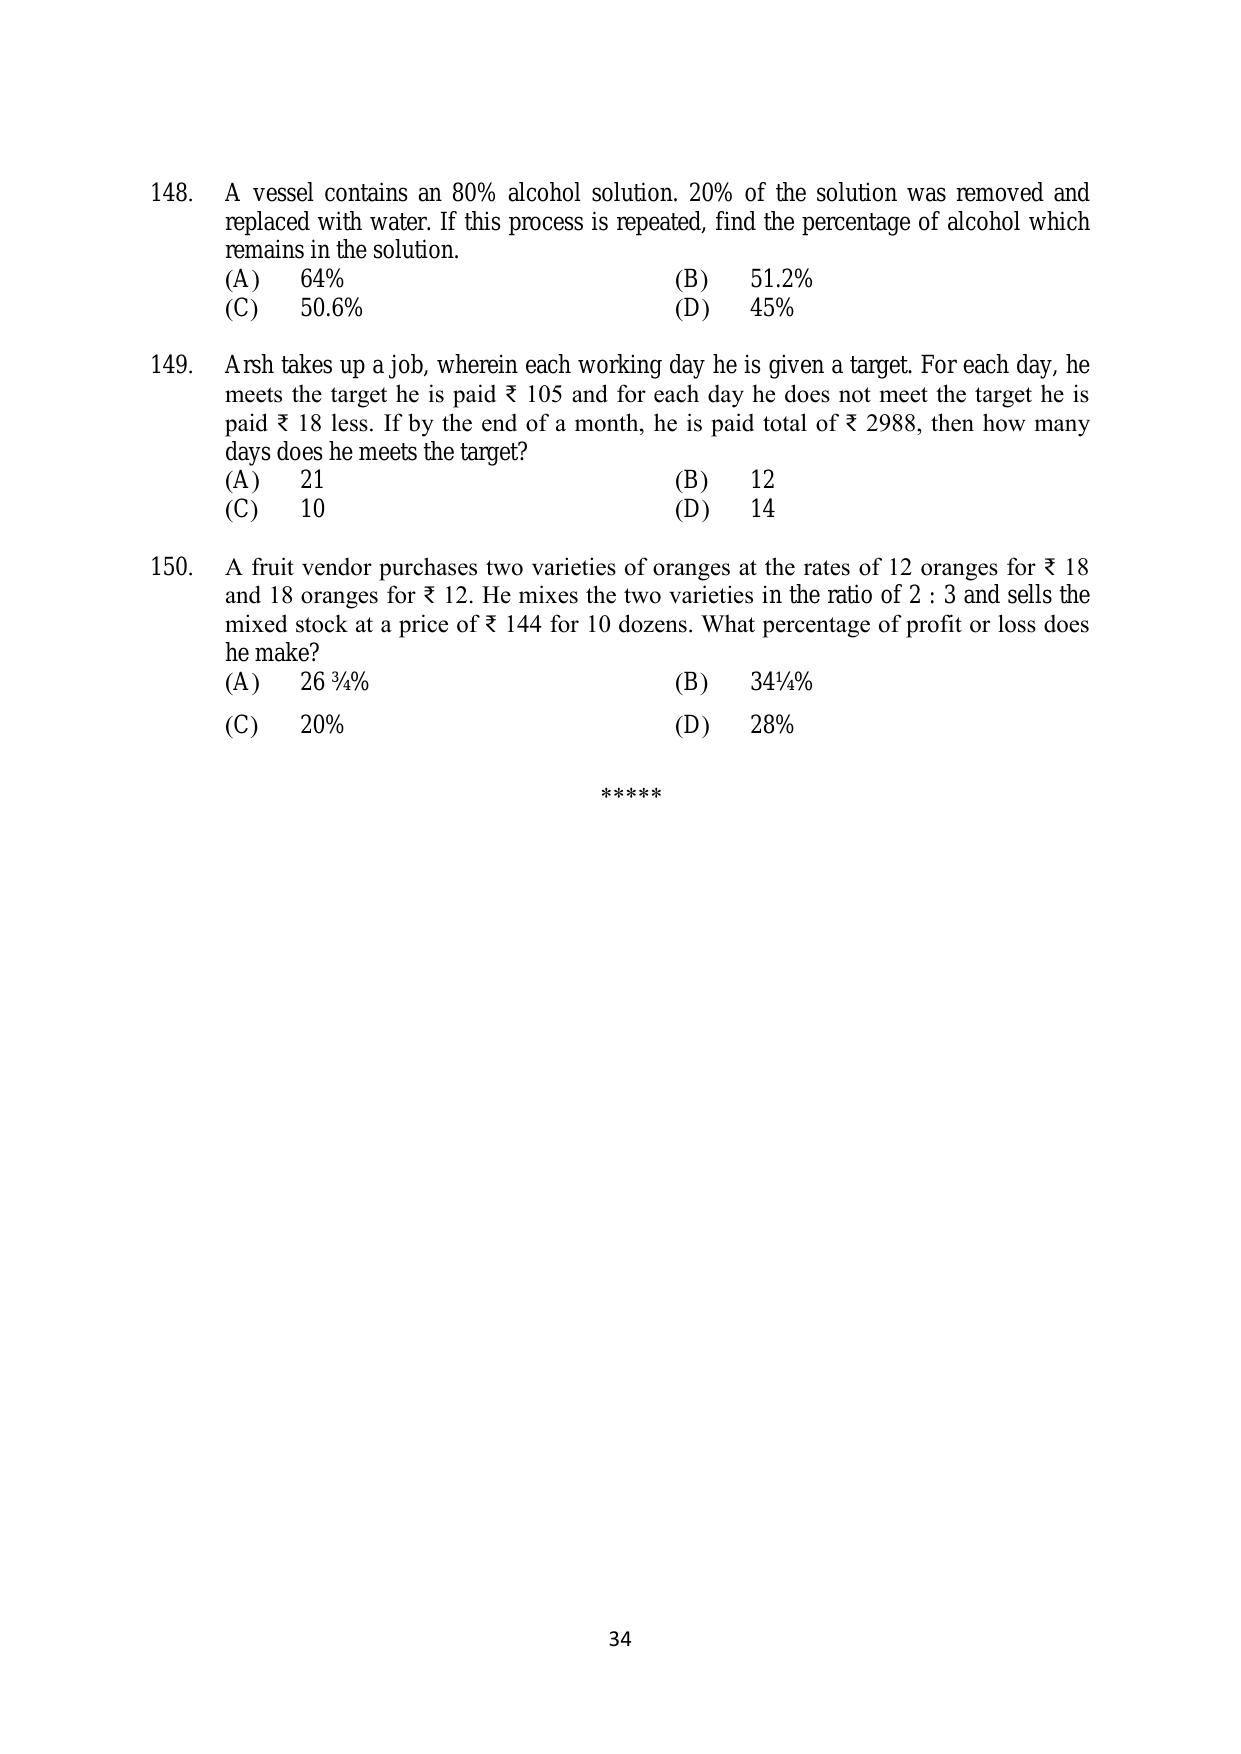 AILET 2020 Question Paper for BA LLB - Page 34